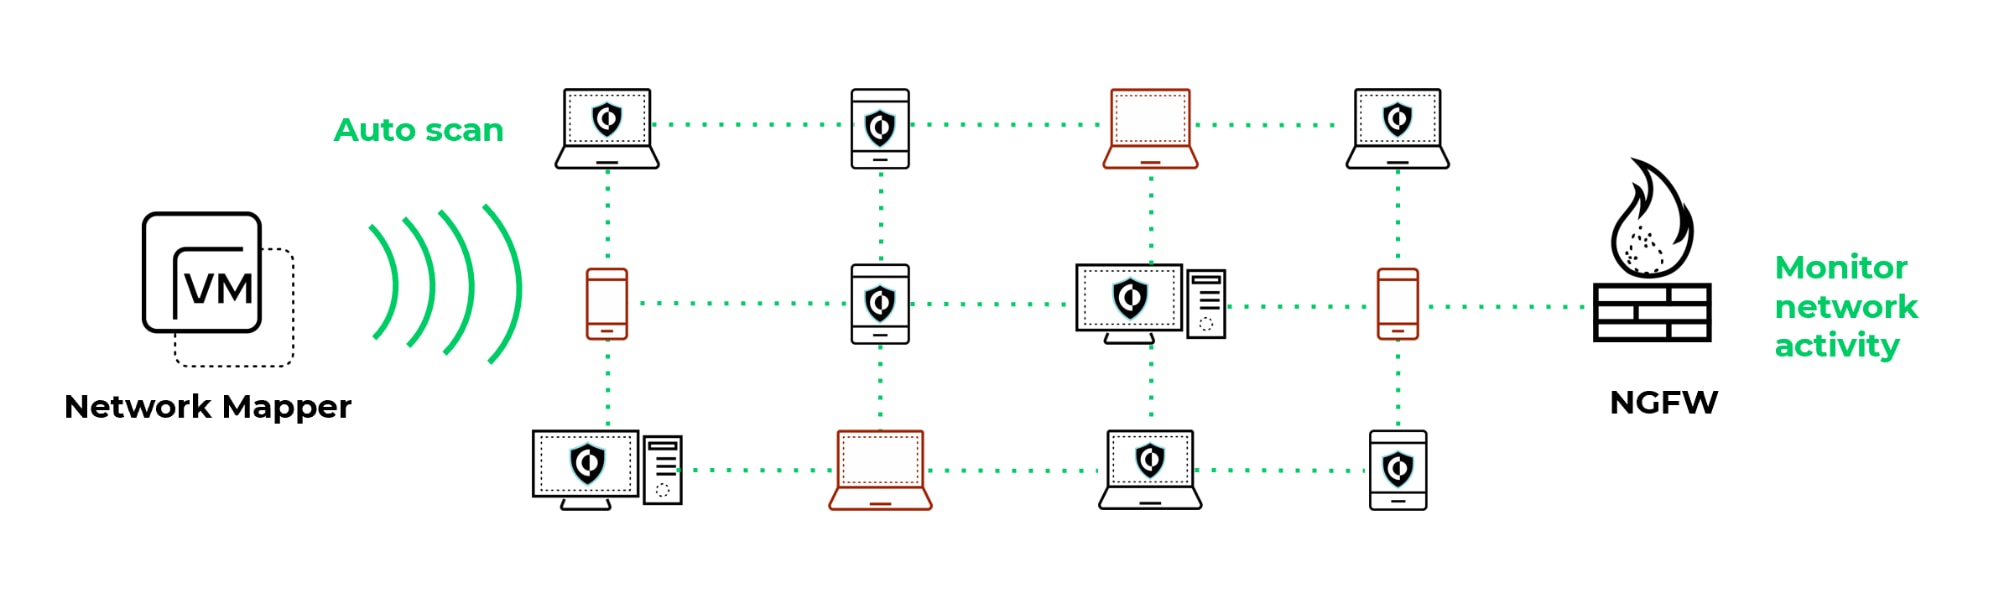 Cortex XDR uses a Network Mapper to scan for every endpoint on your network. The graphic illustrates how this can work in concert with the NGFW.